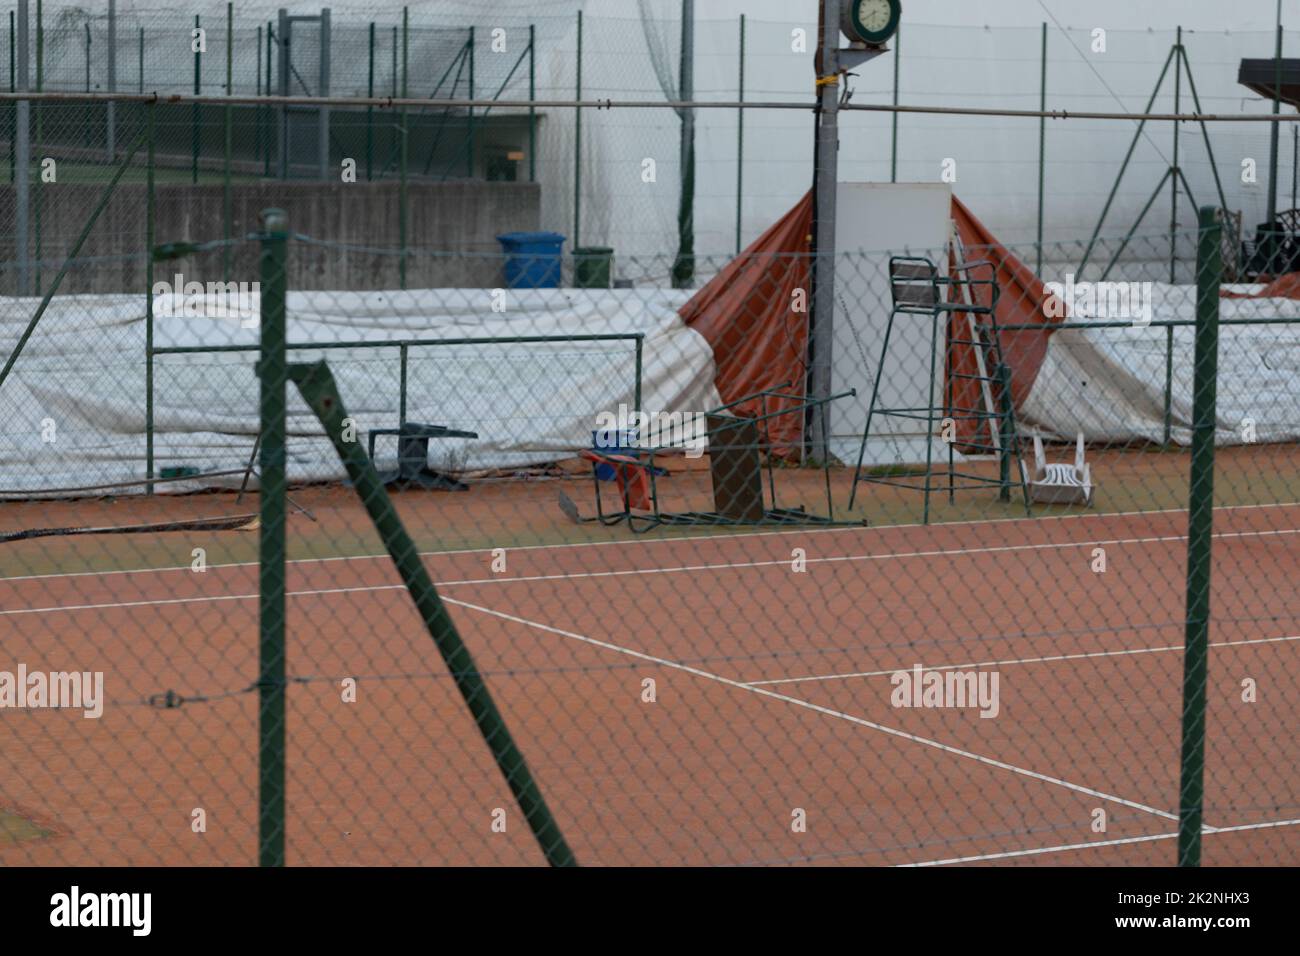 Empty all weather tennis court with umpires chair Stock Photo